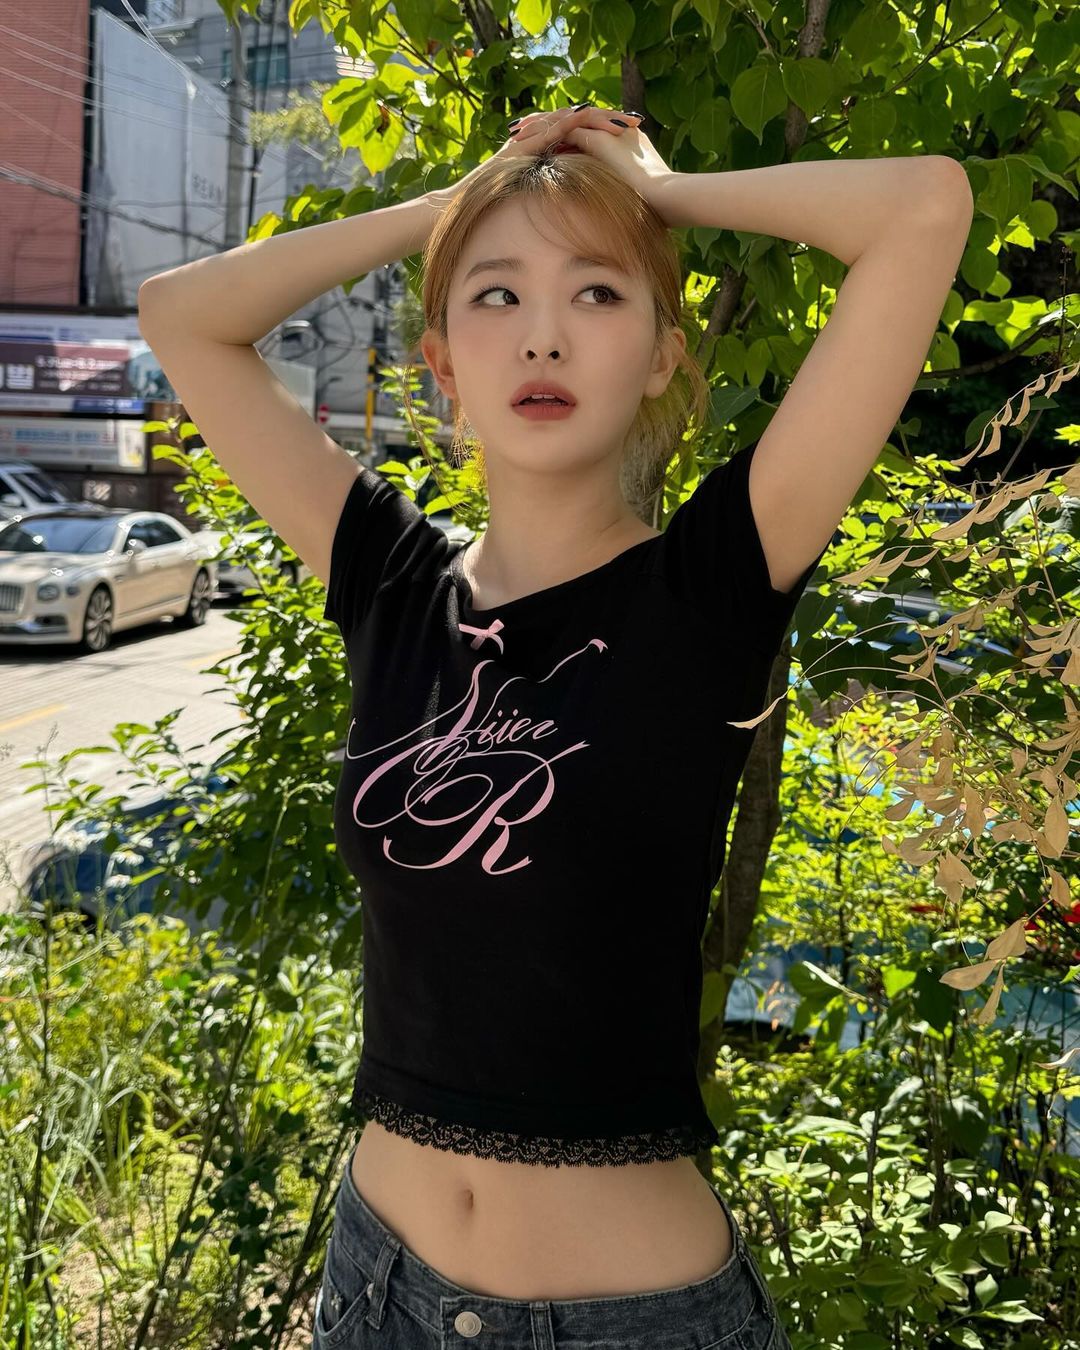 A sexy-looking black crop top with lace at the end. Red Velvet's Seulgi's sexy outfit